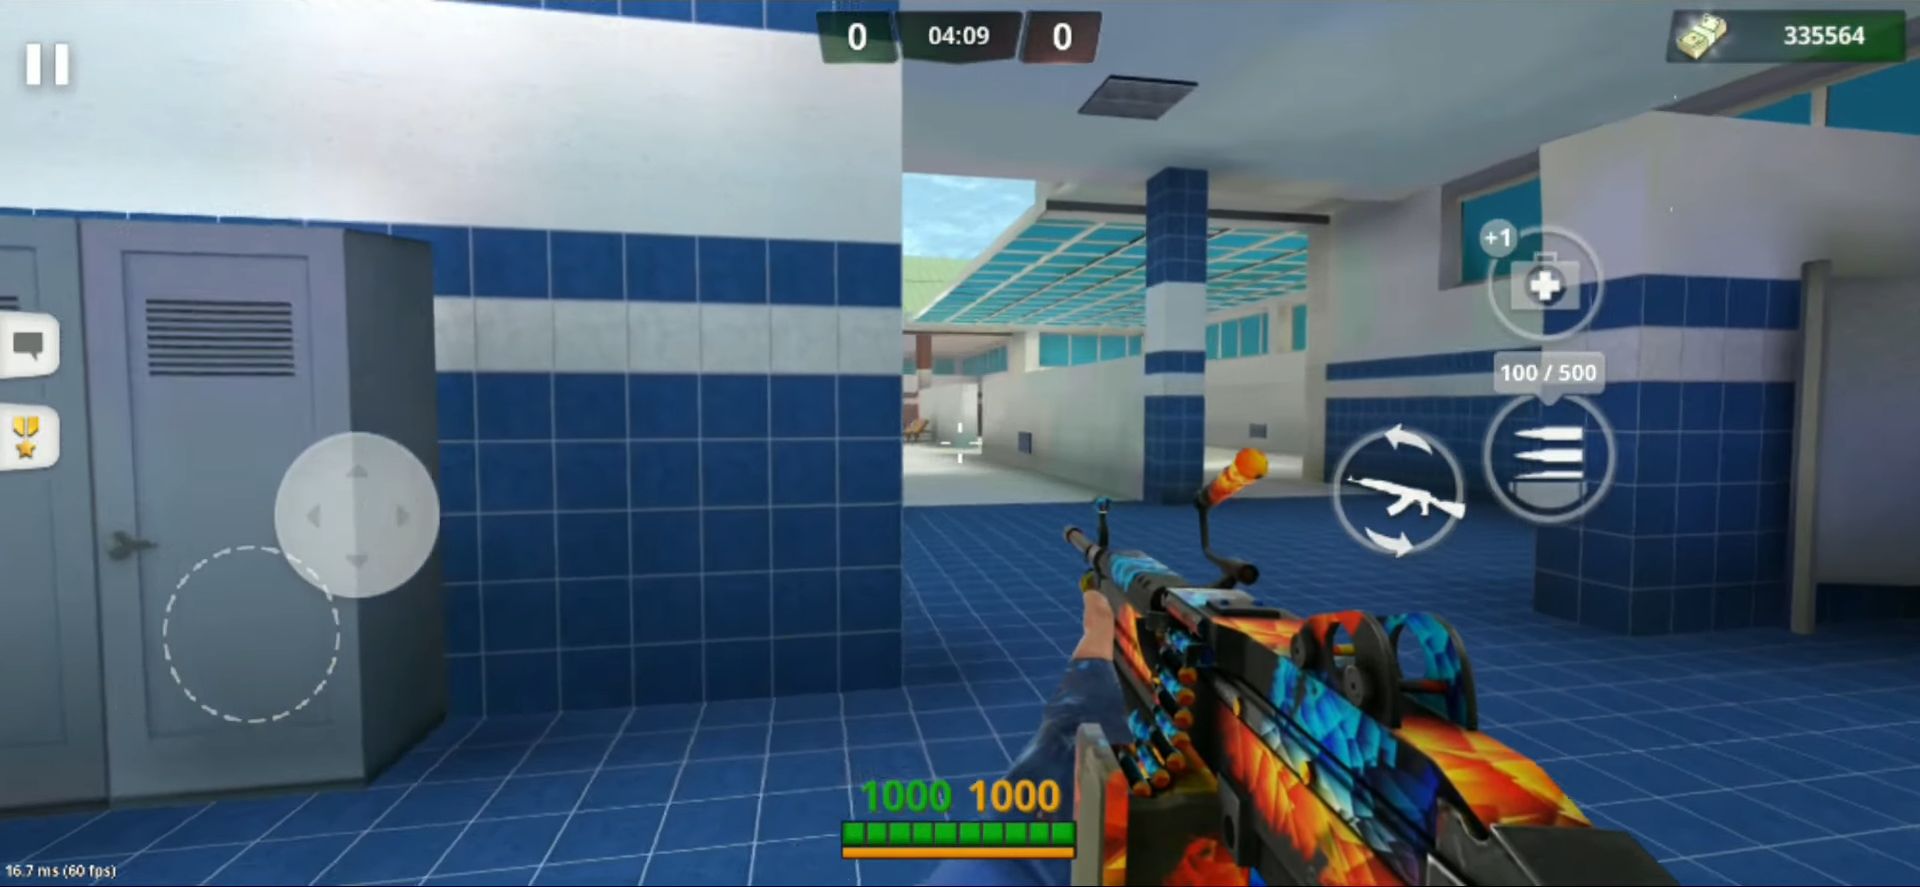 Special Ops: FPS PvP War-Online gun shooting games for Android